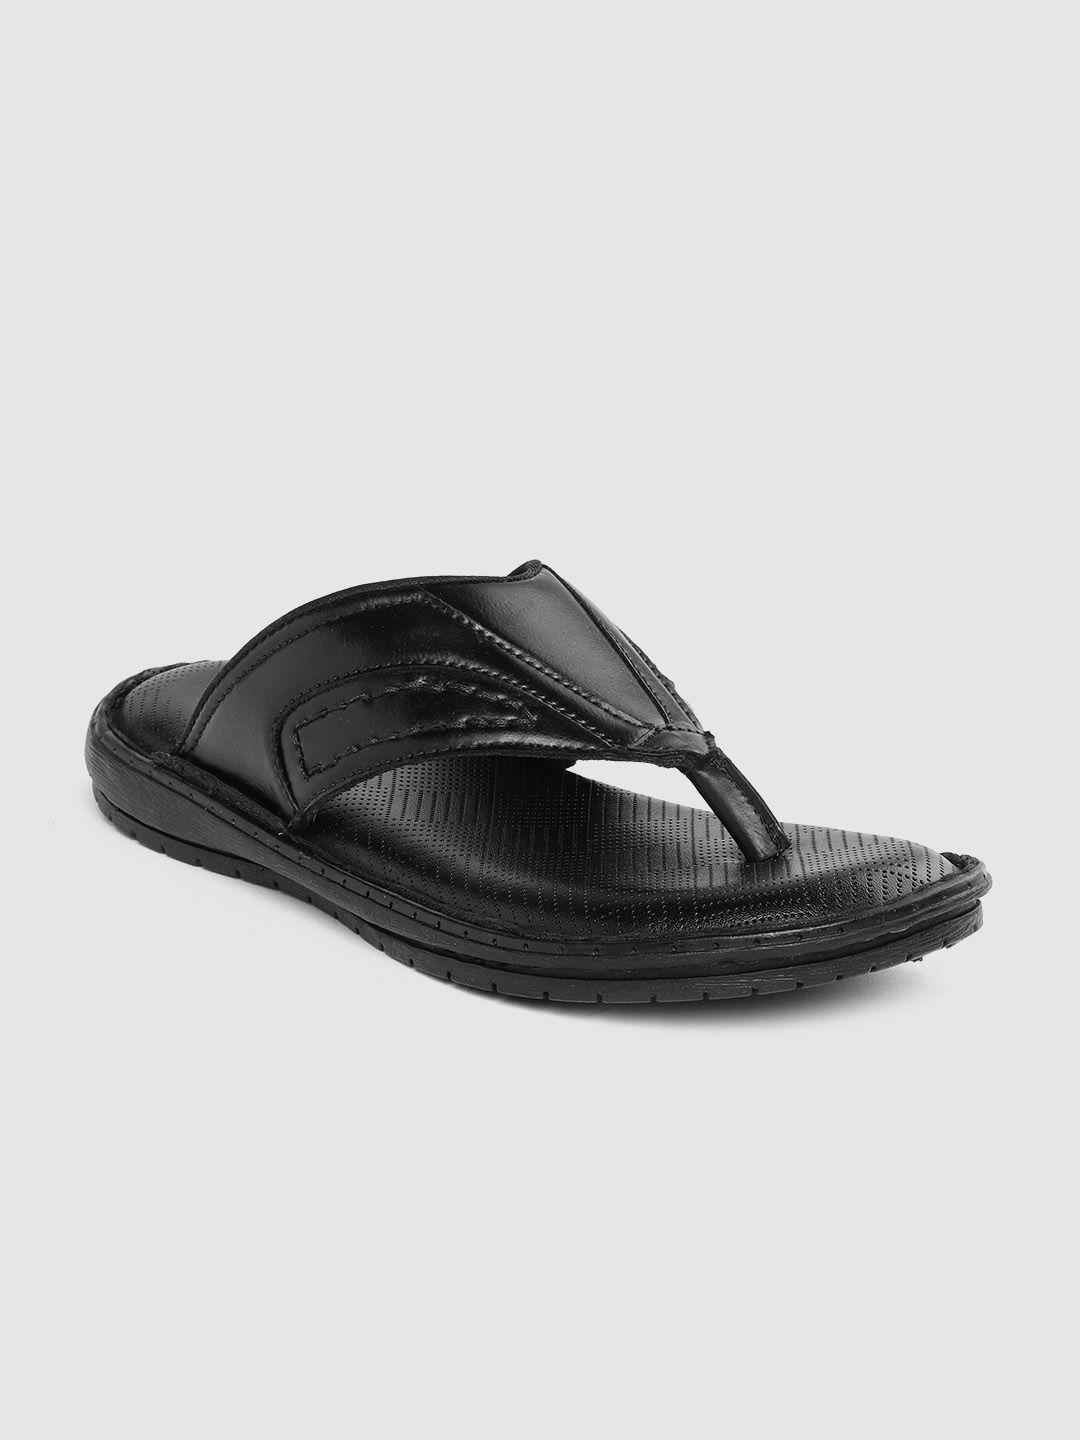 roadster-men-black-solid-thong-sandals-with-thread-work-detail